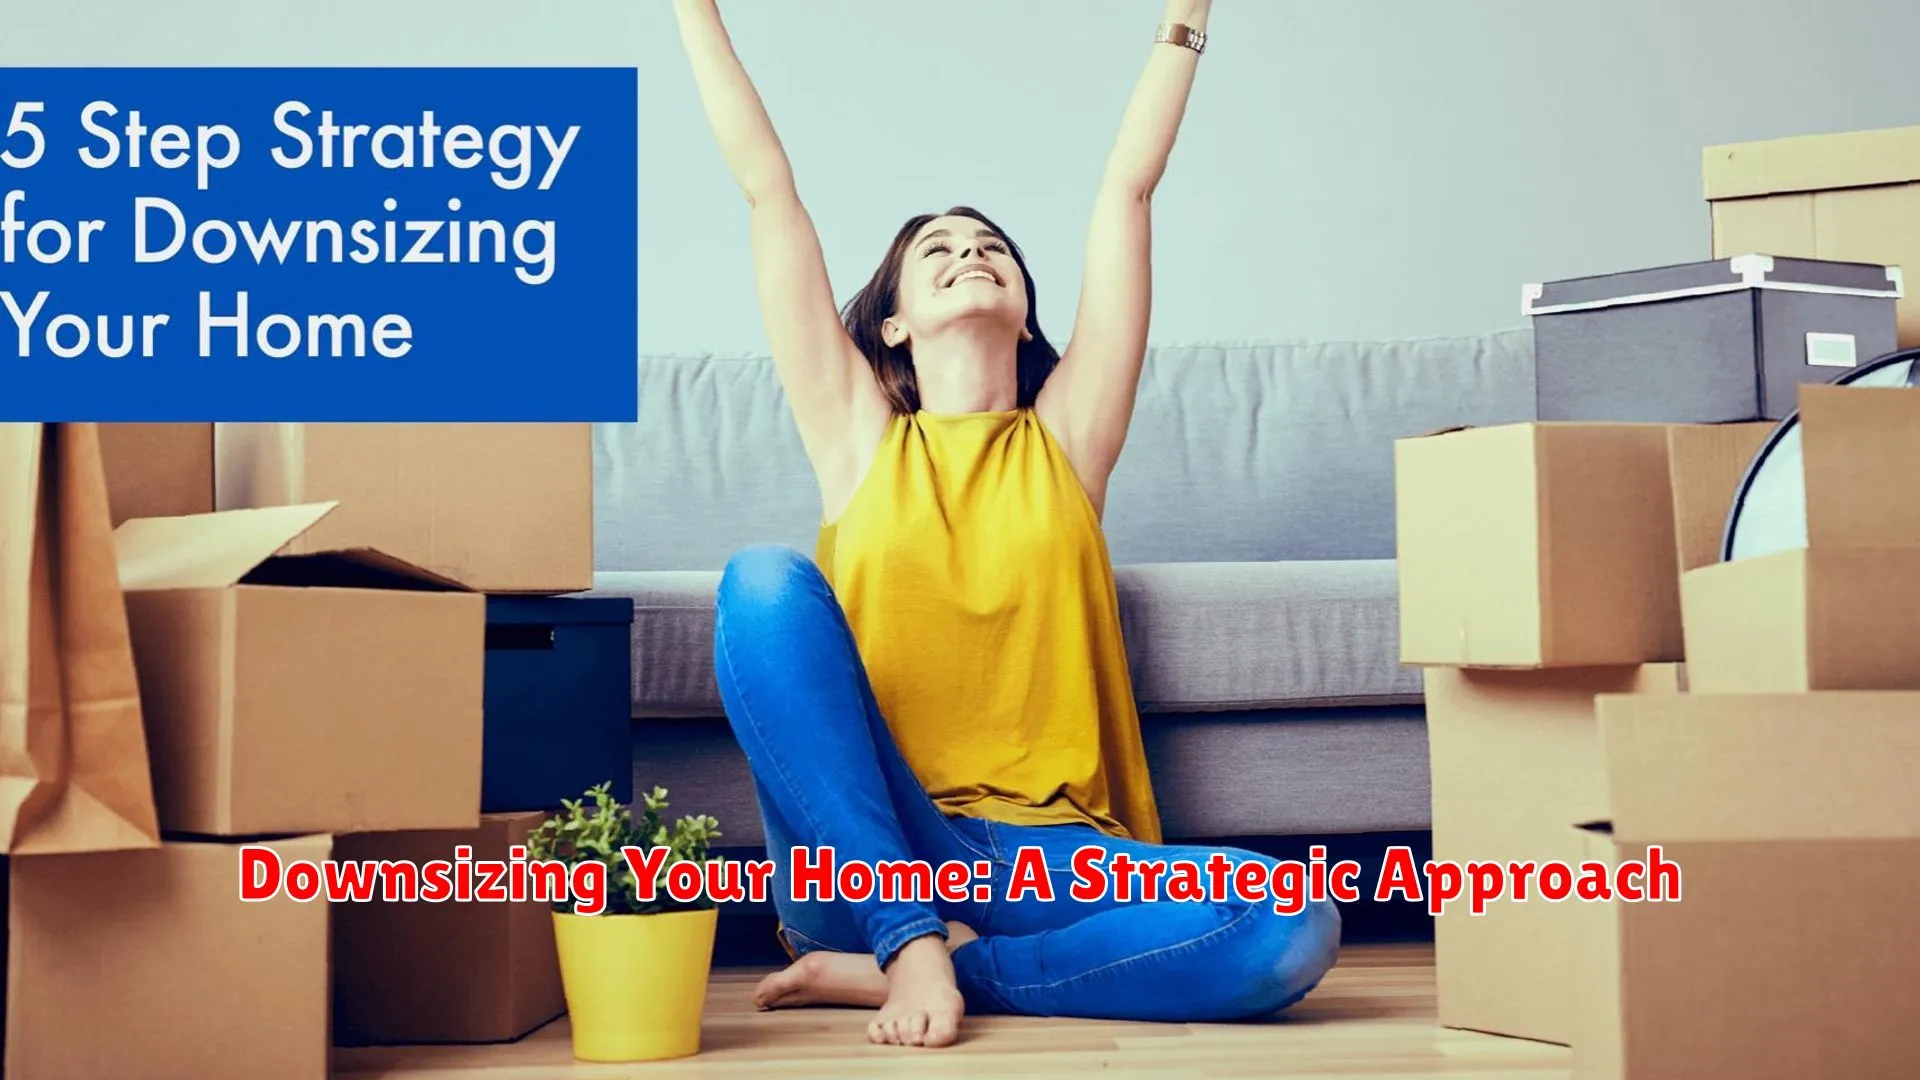 Downsizing Your Home: A Strategic Approach